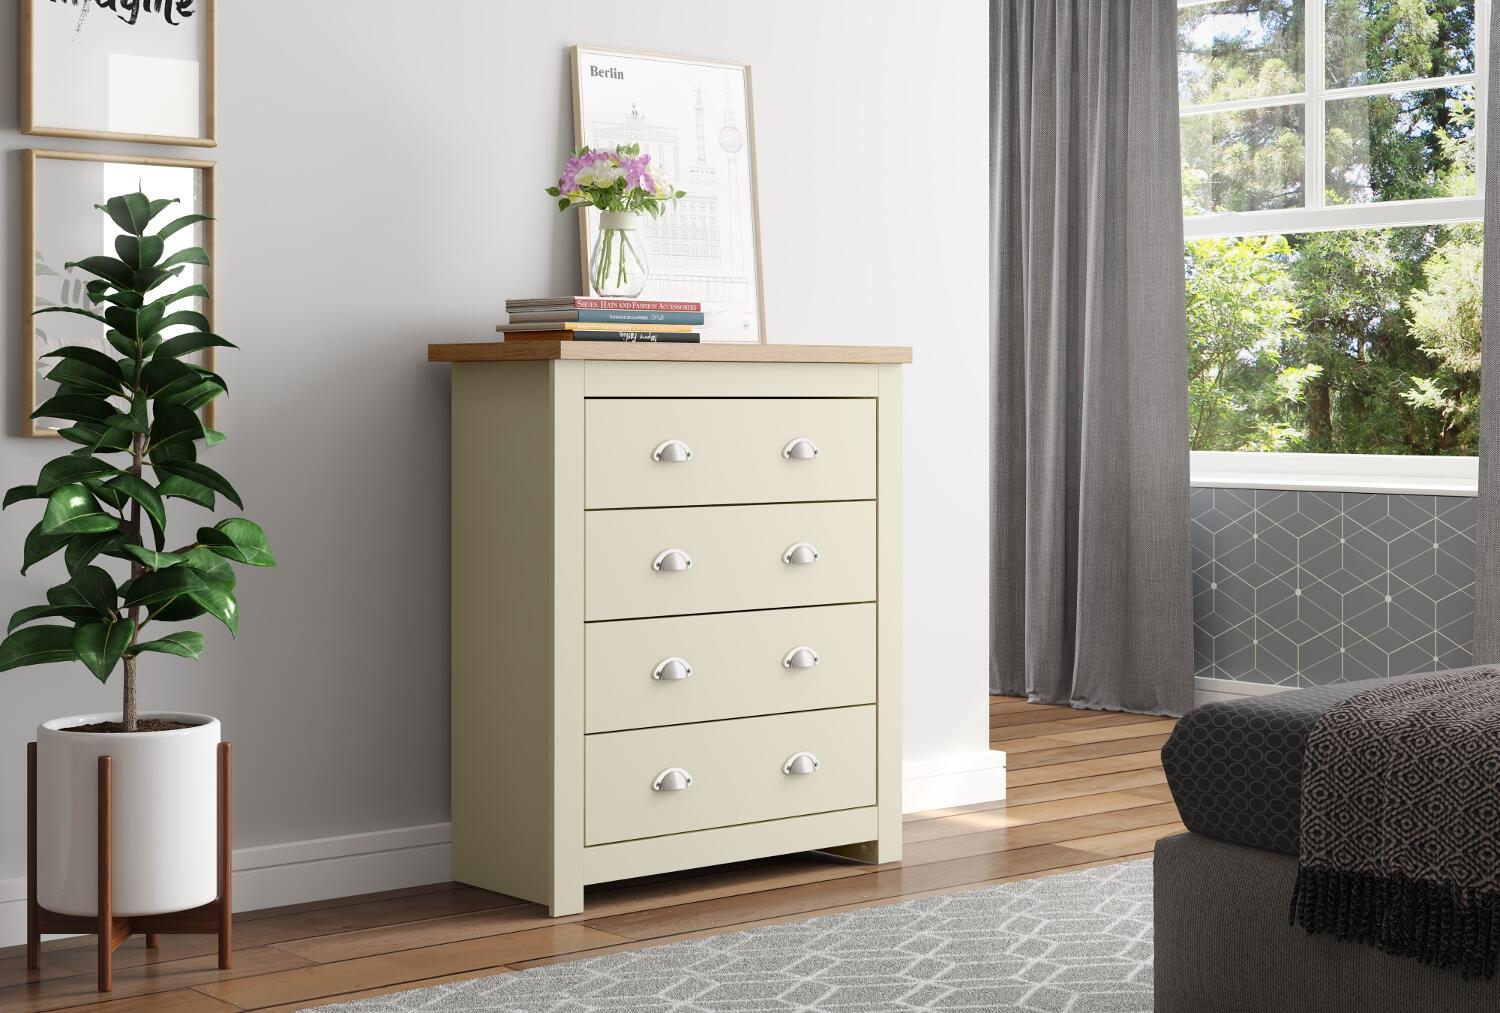 Winchester Cream and Oak Wooden Bedroom Furniture Collection